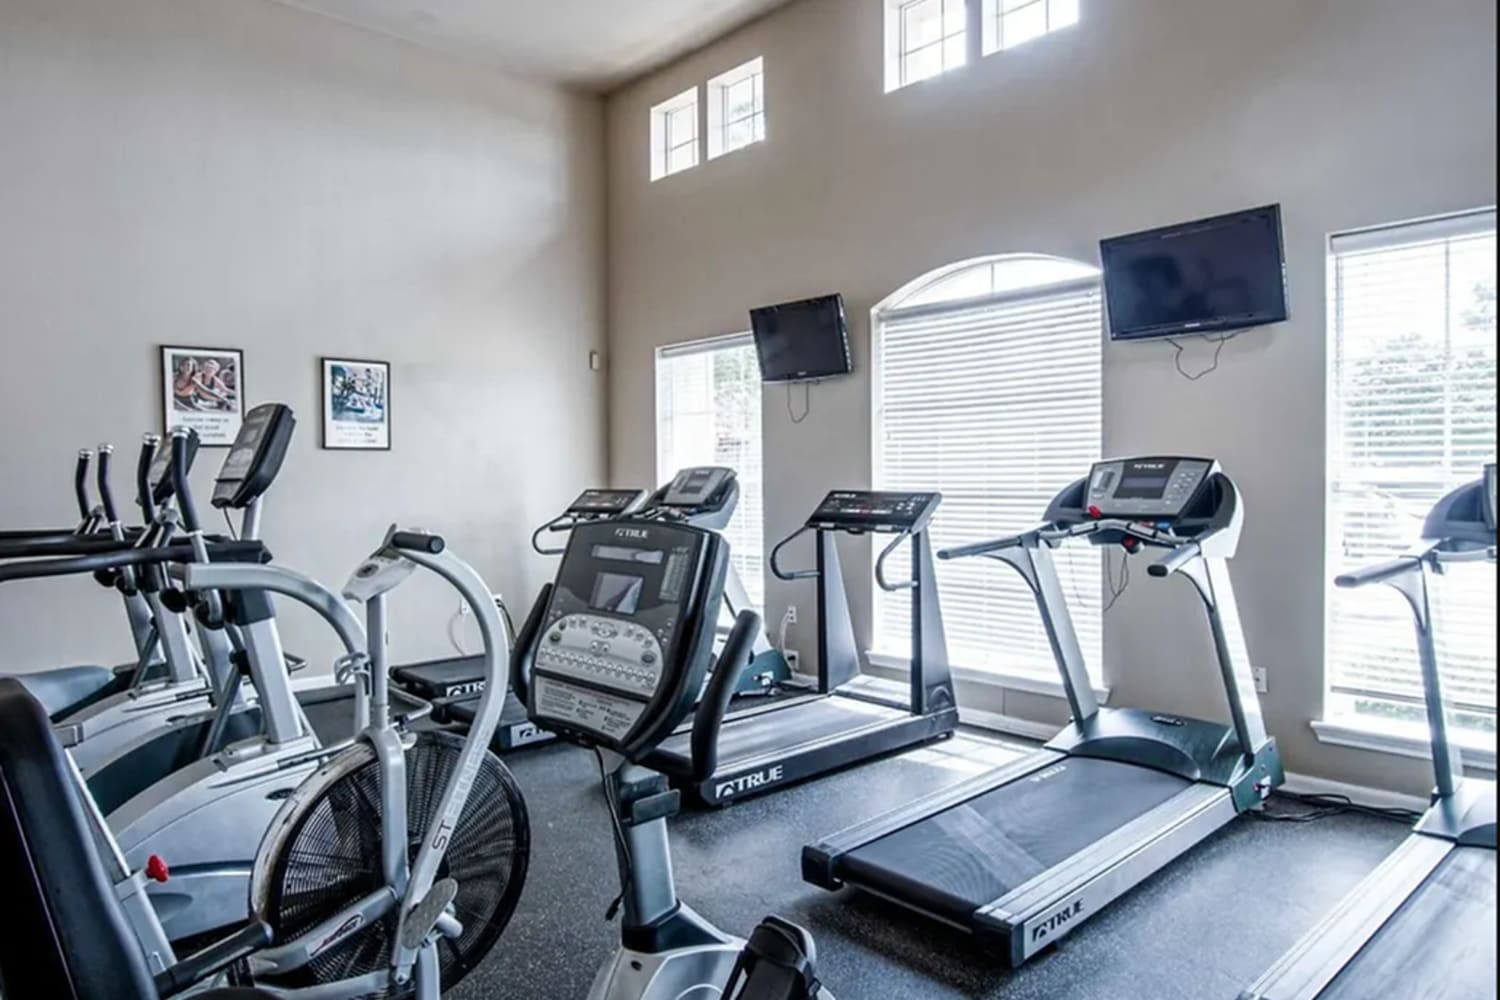 Fitness center at Chateau des Lions Apartment Homes in Lafayette, Louisiana